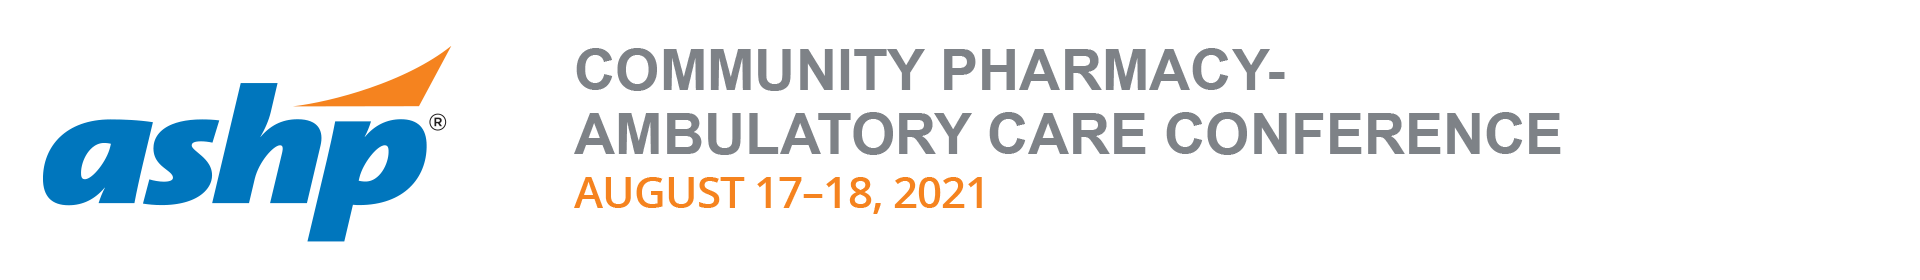 Community Pharmacy – Ambulatory Care Pharmacy 2021 Conference Event Banner